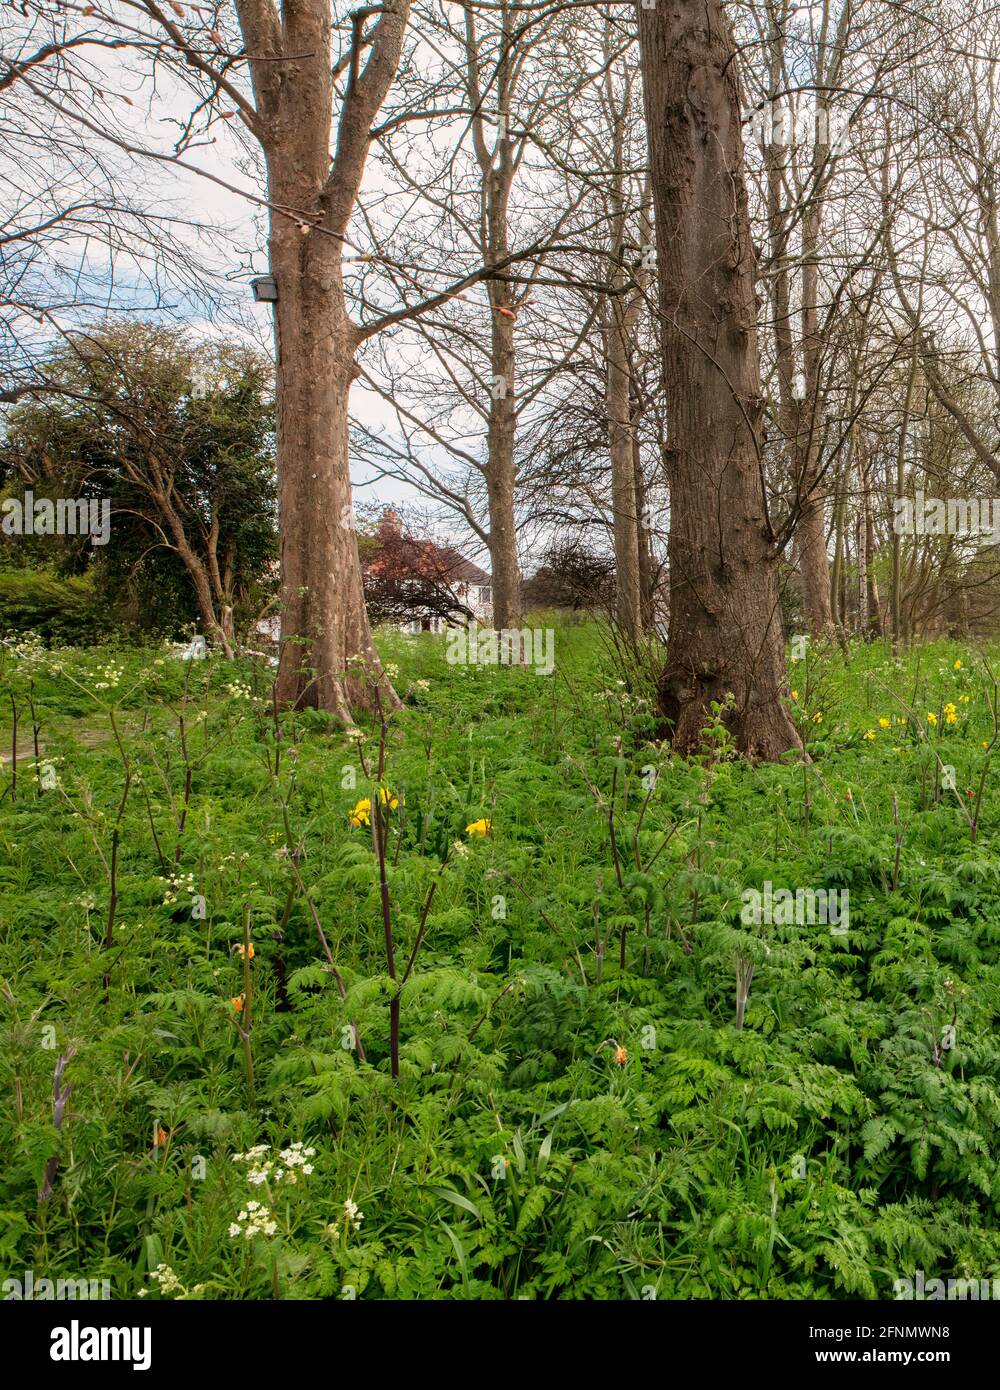 Lobb's Wood, Littlehampton, West Sussex; a pocket park full of cow parsley and maintained by Arun District Council Stock Photo